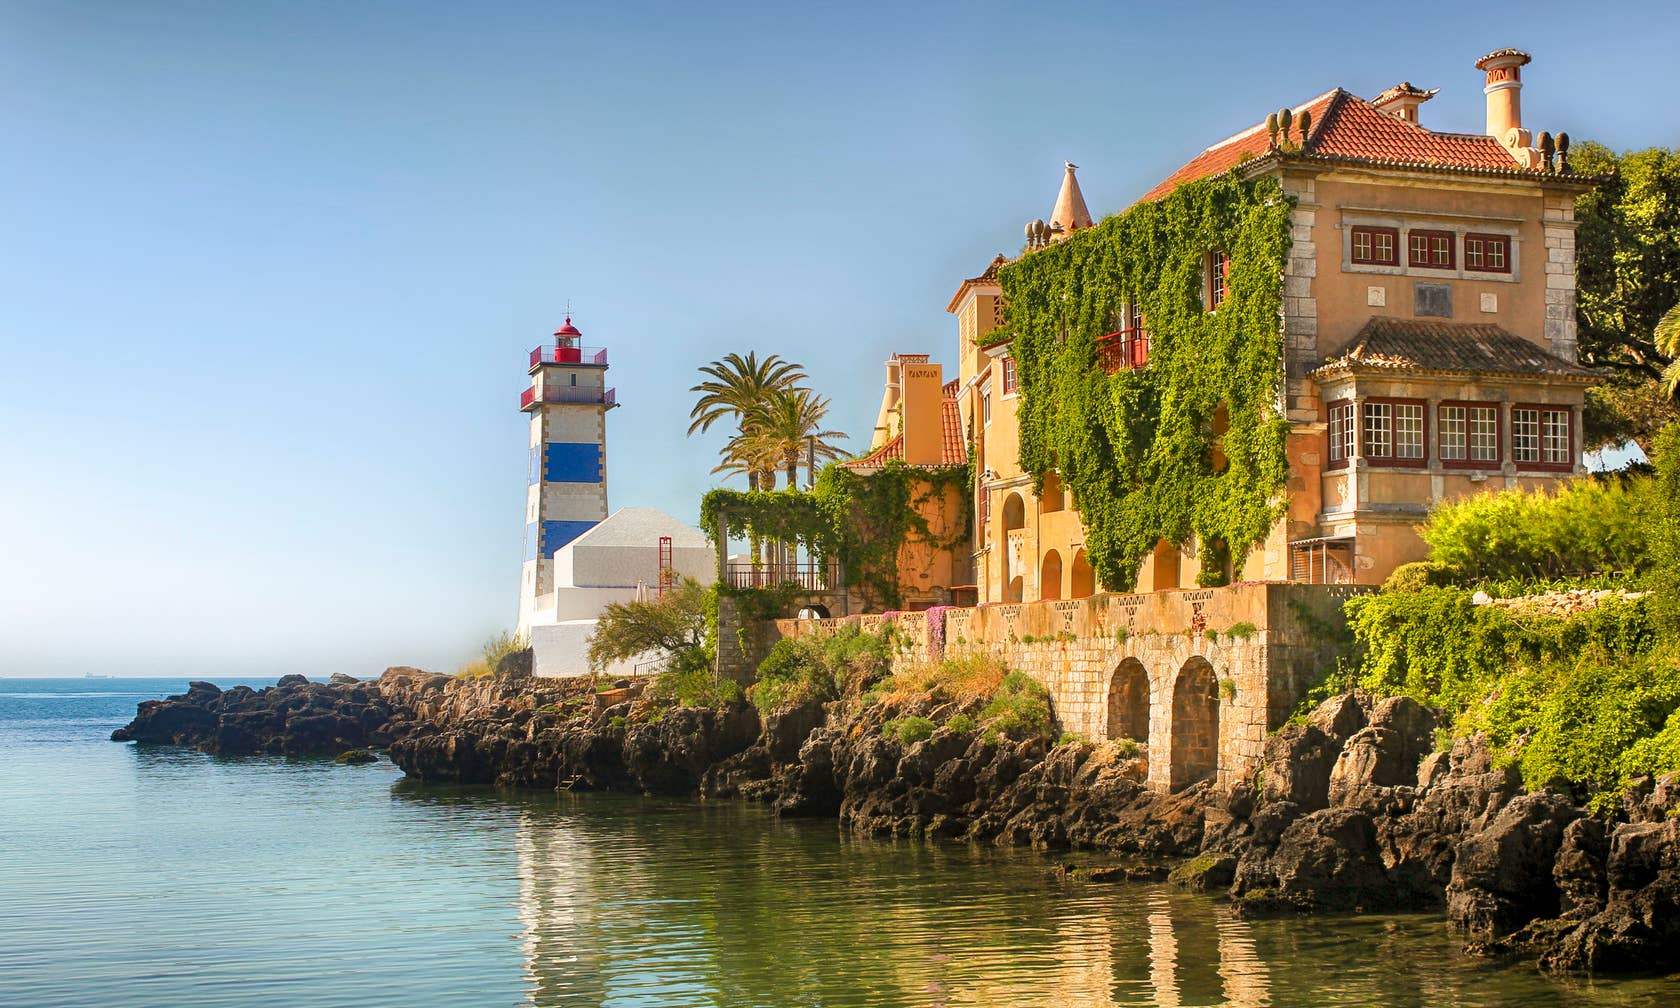 Holiday rentals in Cascais